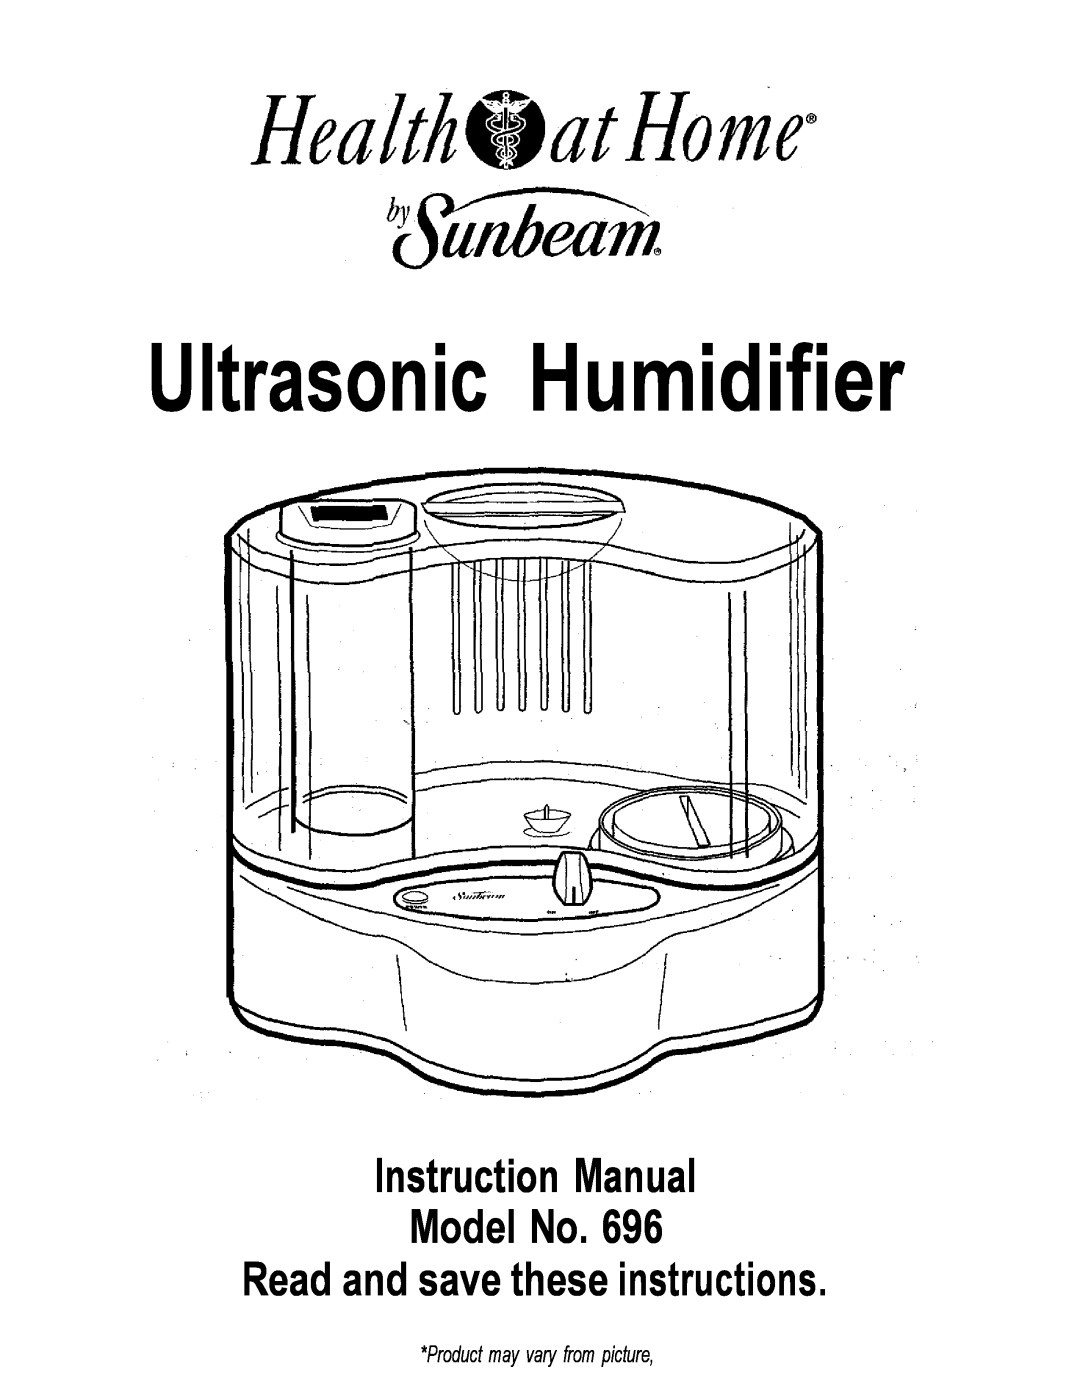 Sunbeam 696 instruction manual Read and save these instructions, Ultrasonic Humidifier, Product may vary from picture 